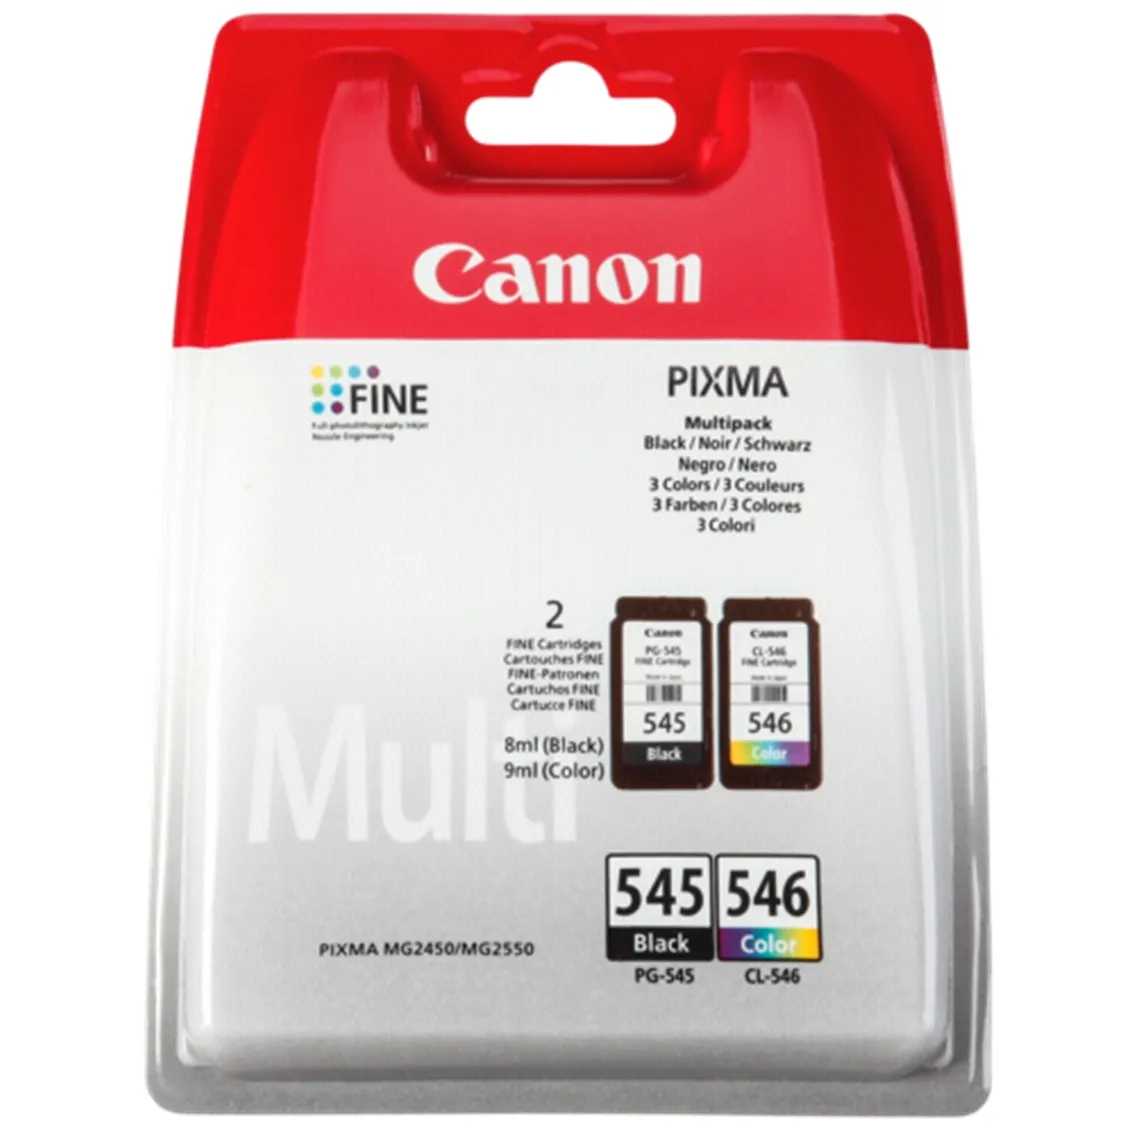 Multipack canon pg - 545 - cl - 546 blister mg2450 - mg2550